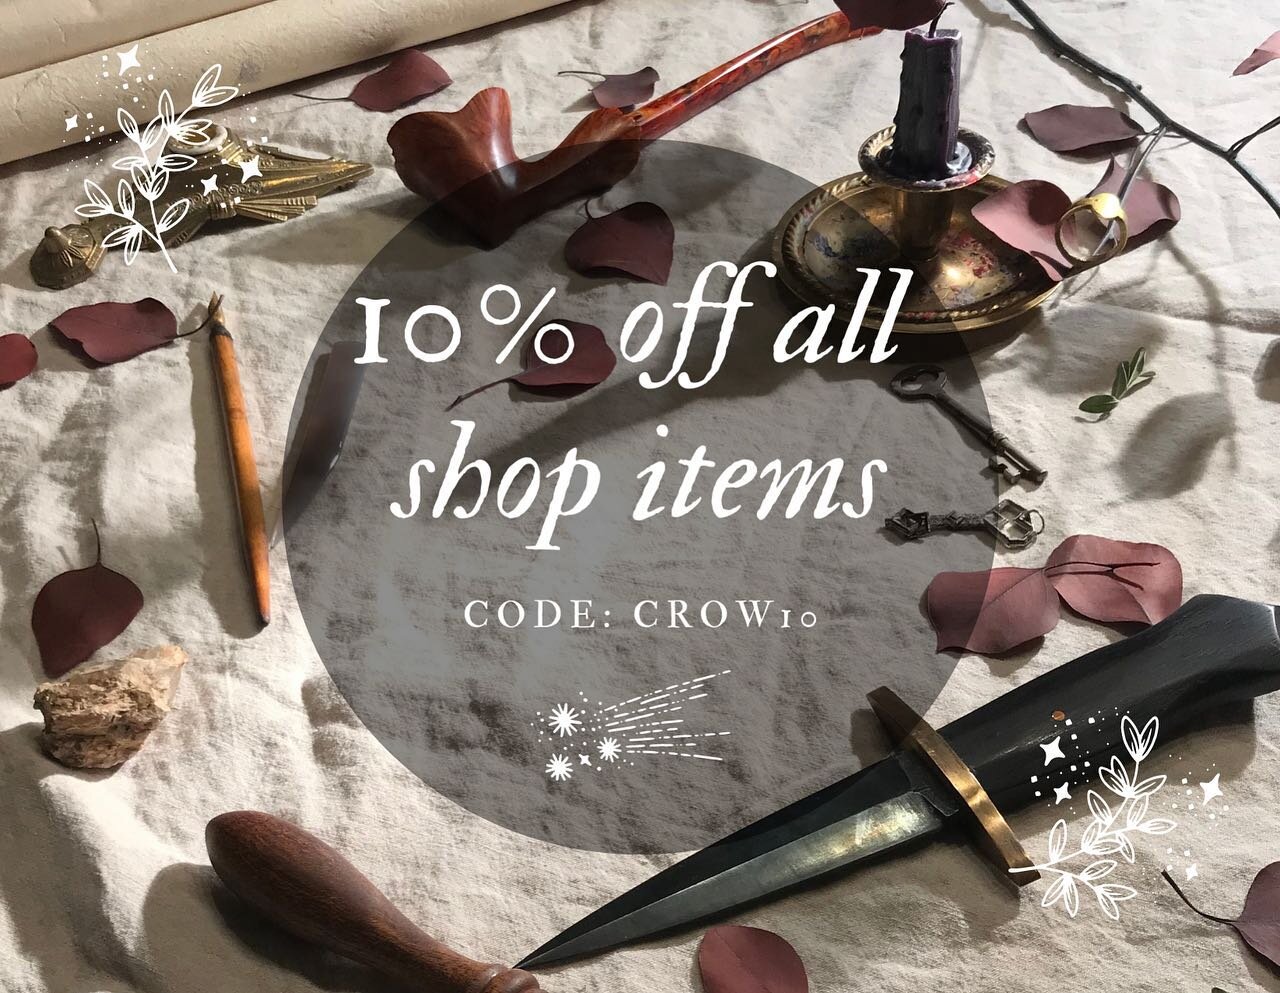 First time I&rsquo;ve made a code! I call this one Crow&rsquo;s Fancy, and you get 10% off all shop items when CROW10 is applied at checkout. This code expires on Saturday, June 4th at midnight. (Also I wanted to sneak in some other details of my rec